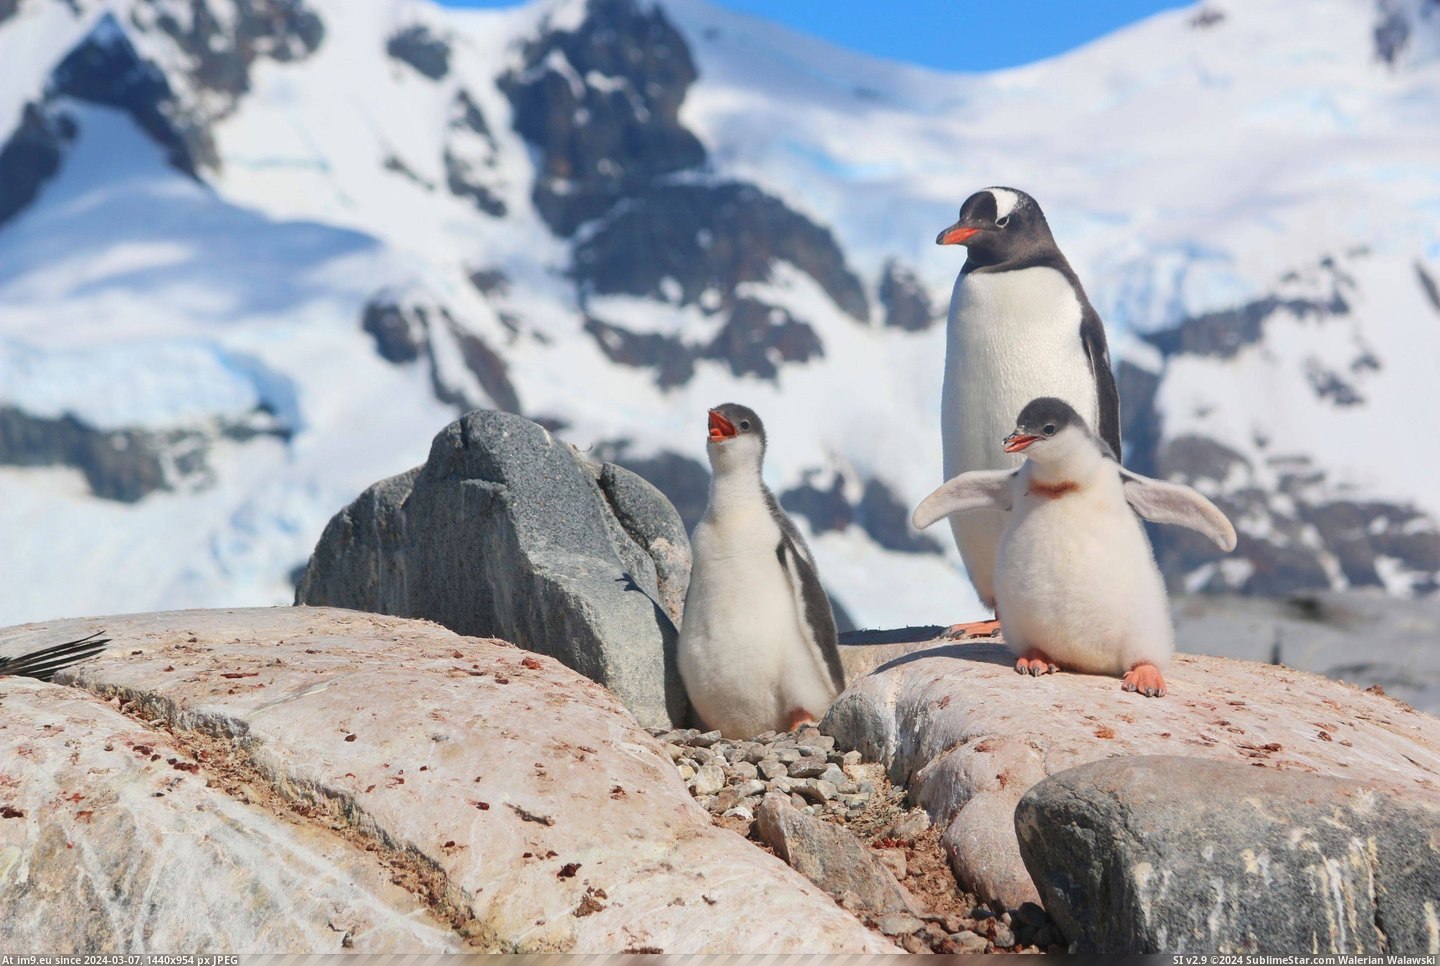 #Wallpaper #Beautiful #Happy #Snow #Highres #Antarctica #Opportunity #Family #Month #Visit #Ran [Aww] Last month I had the opportunity to visit Antarctica, where I ran into this happy family! Pic. (Bild von album My r/AWW favs))